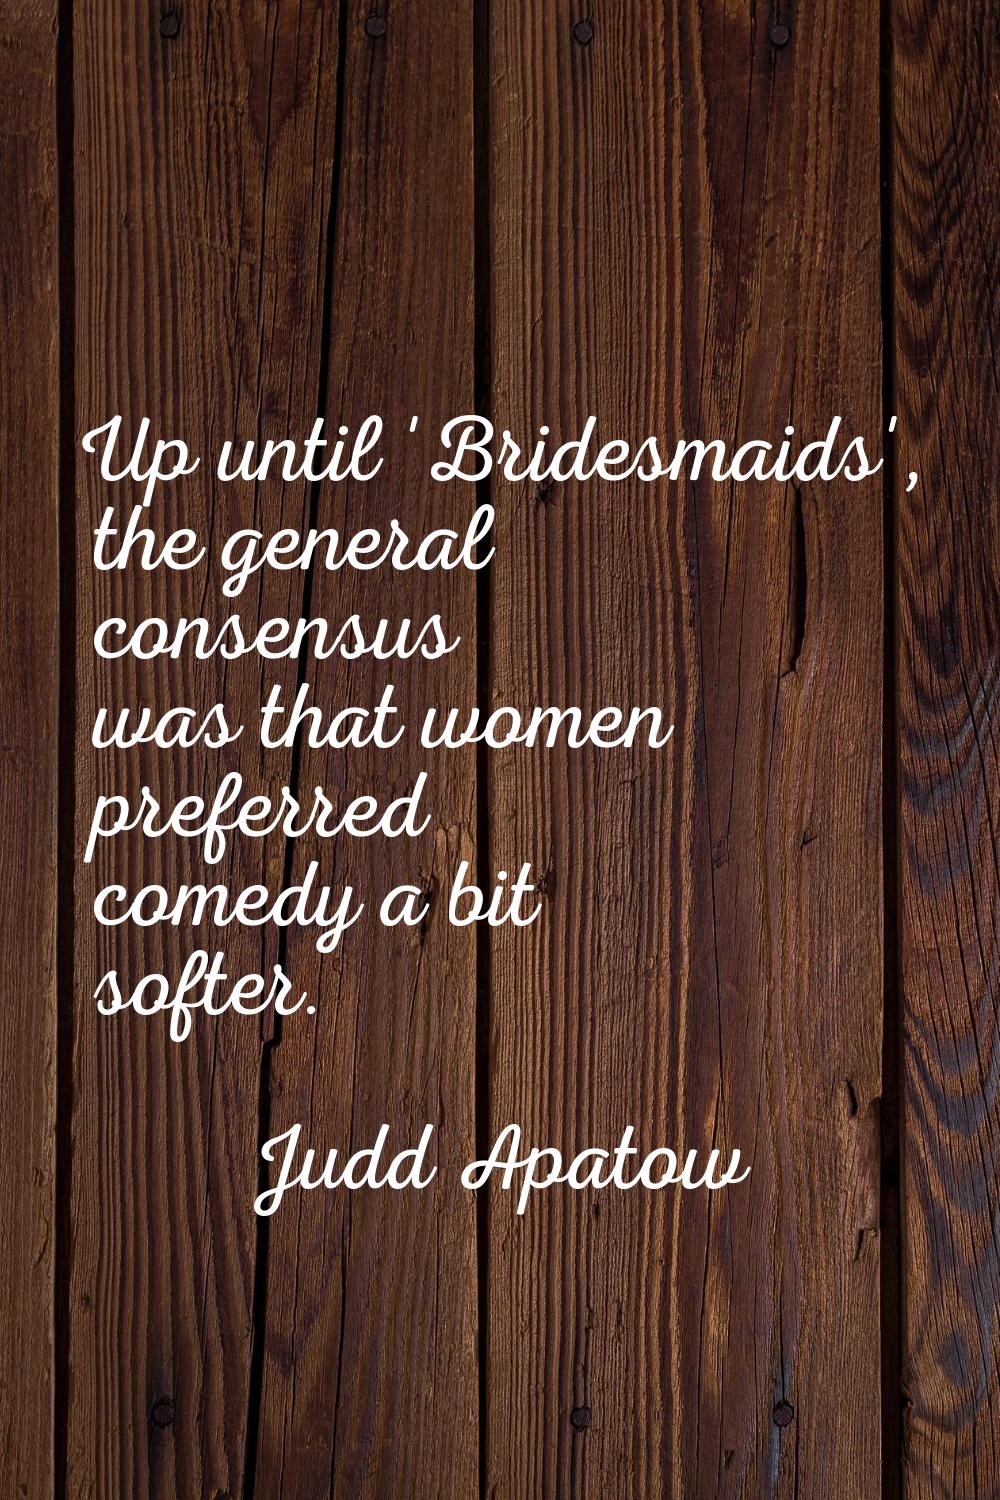 Up until 'Bridesmaids', the general consensus was that women preferred comedy a bit softer.